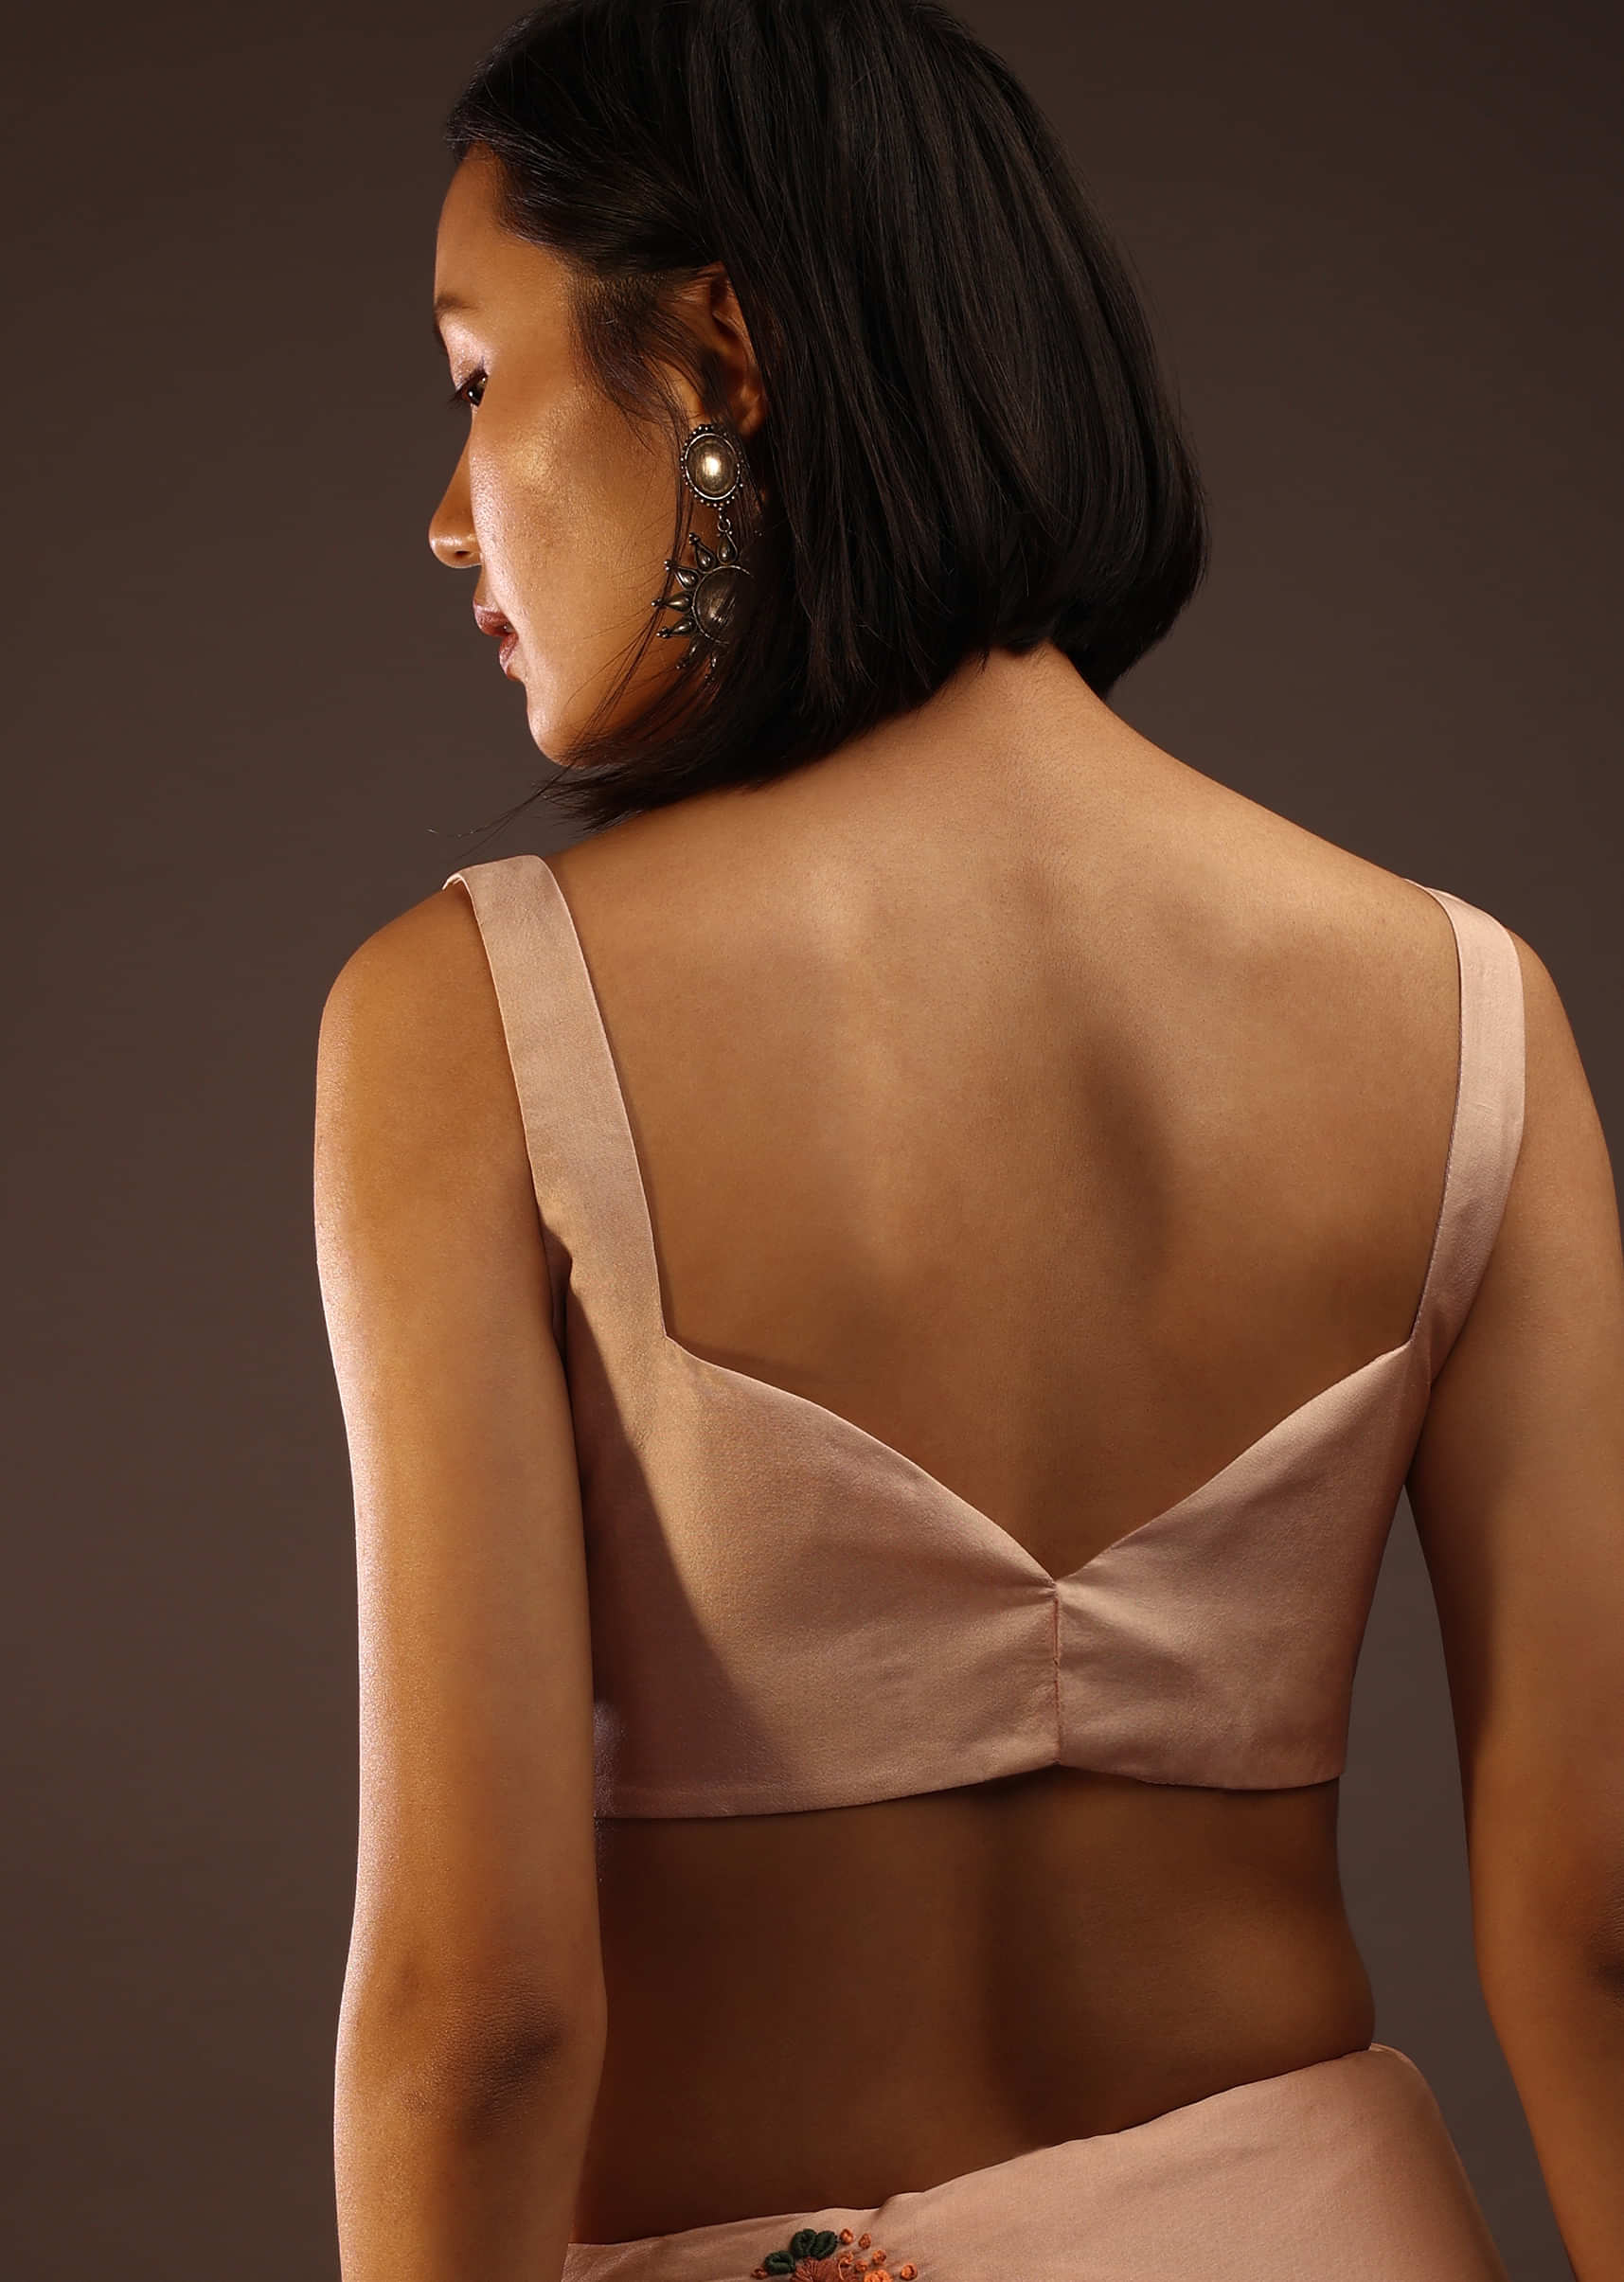 Peach Blush Sleeveless Blouse In A Sweetheart Neckline Back Hook Closure With A Straight Hemline